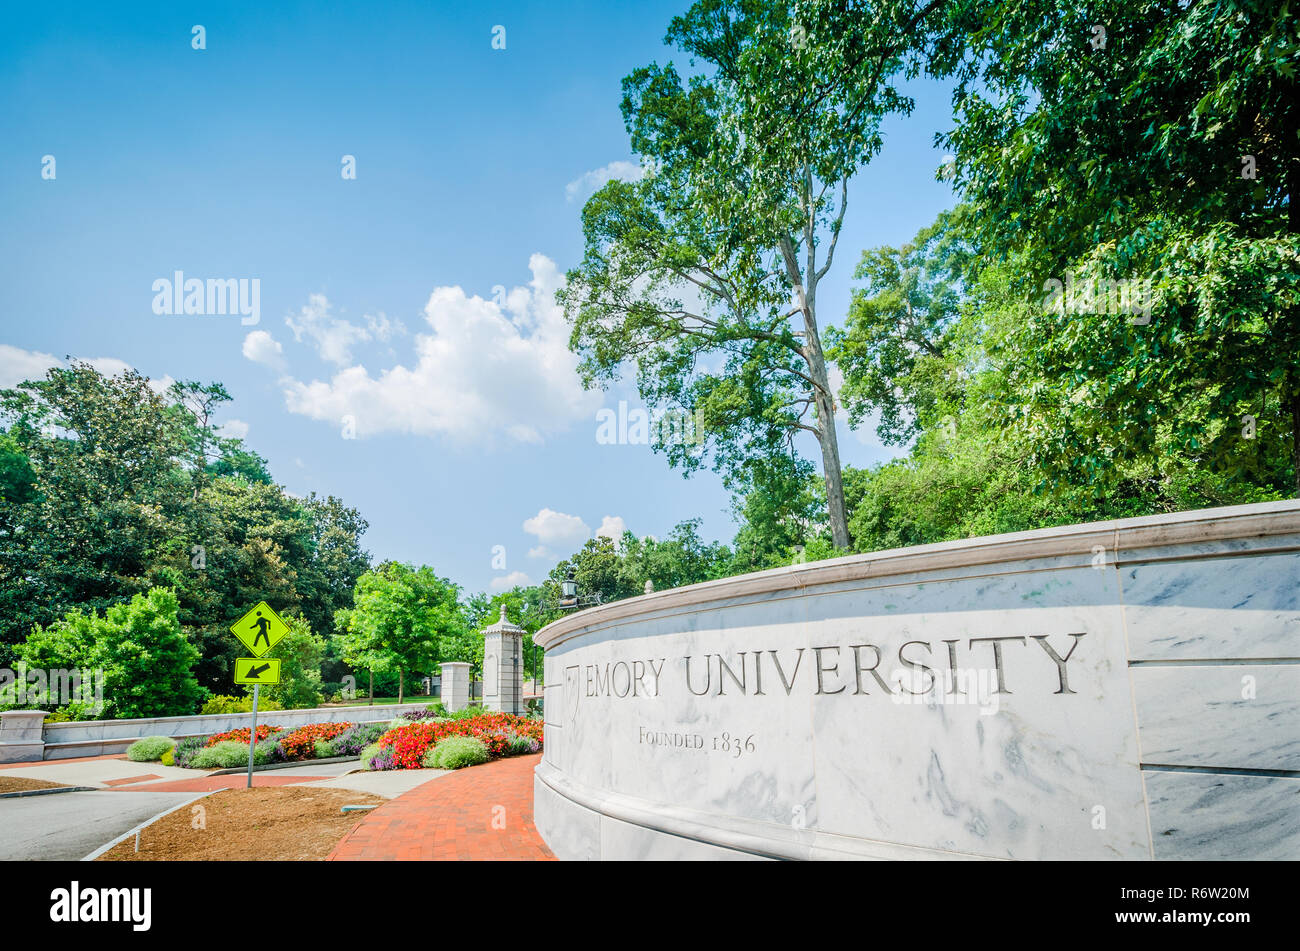 Flowers bloom at the entrance to Emory University, July 7, 2014, in Atlanta, Georgia. Emory was founded in 1836 and is a private research university. Stock Photo